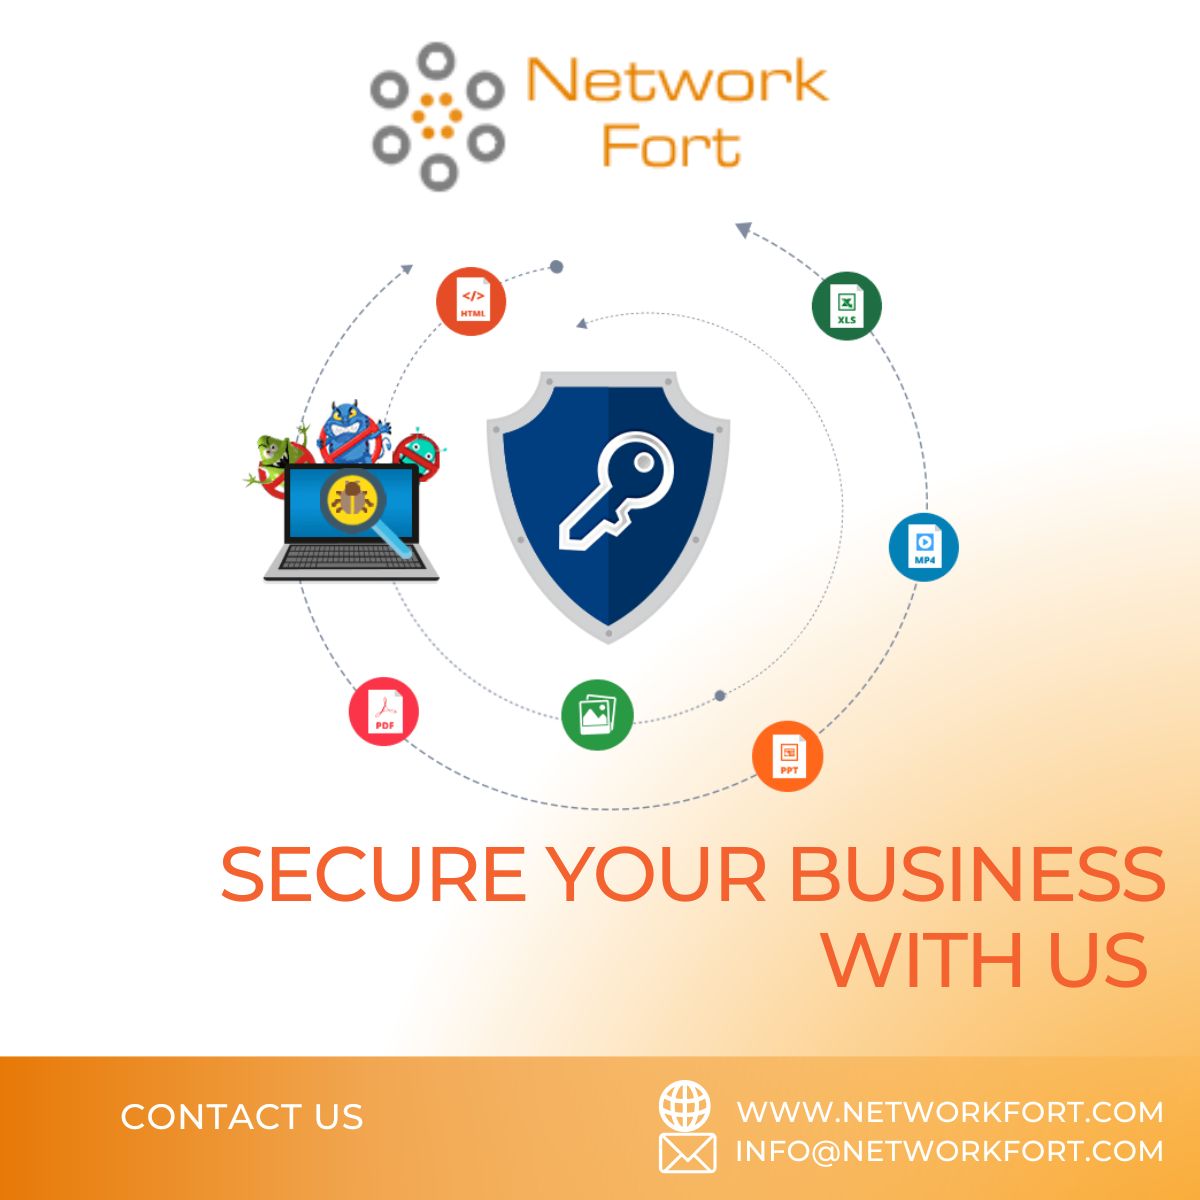 #NetworkFort proactive approach empowers you to #identifyvulnerabilities, #strengthendefenses & respond effectively to #emergingthreats
#secureyourbusiness from #prevailingcyberthreat networkfort.com
#CyberSecurity #DataBreach #Ransomware #PhishingAttack #Malware #Hacking